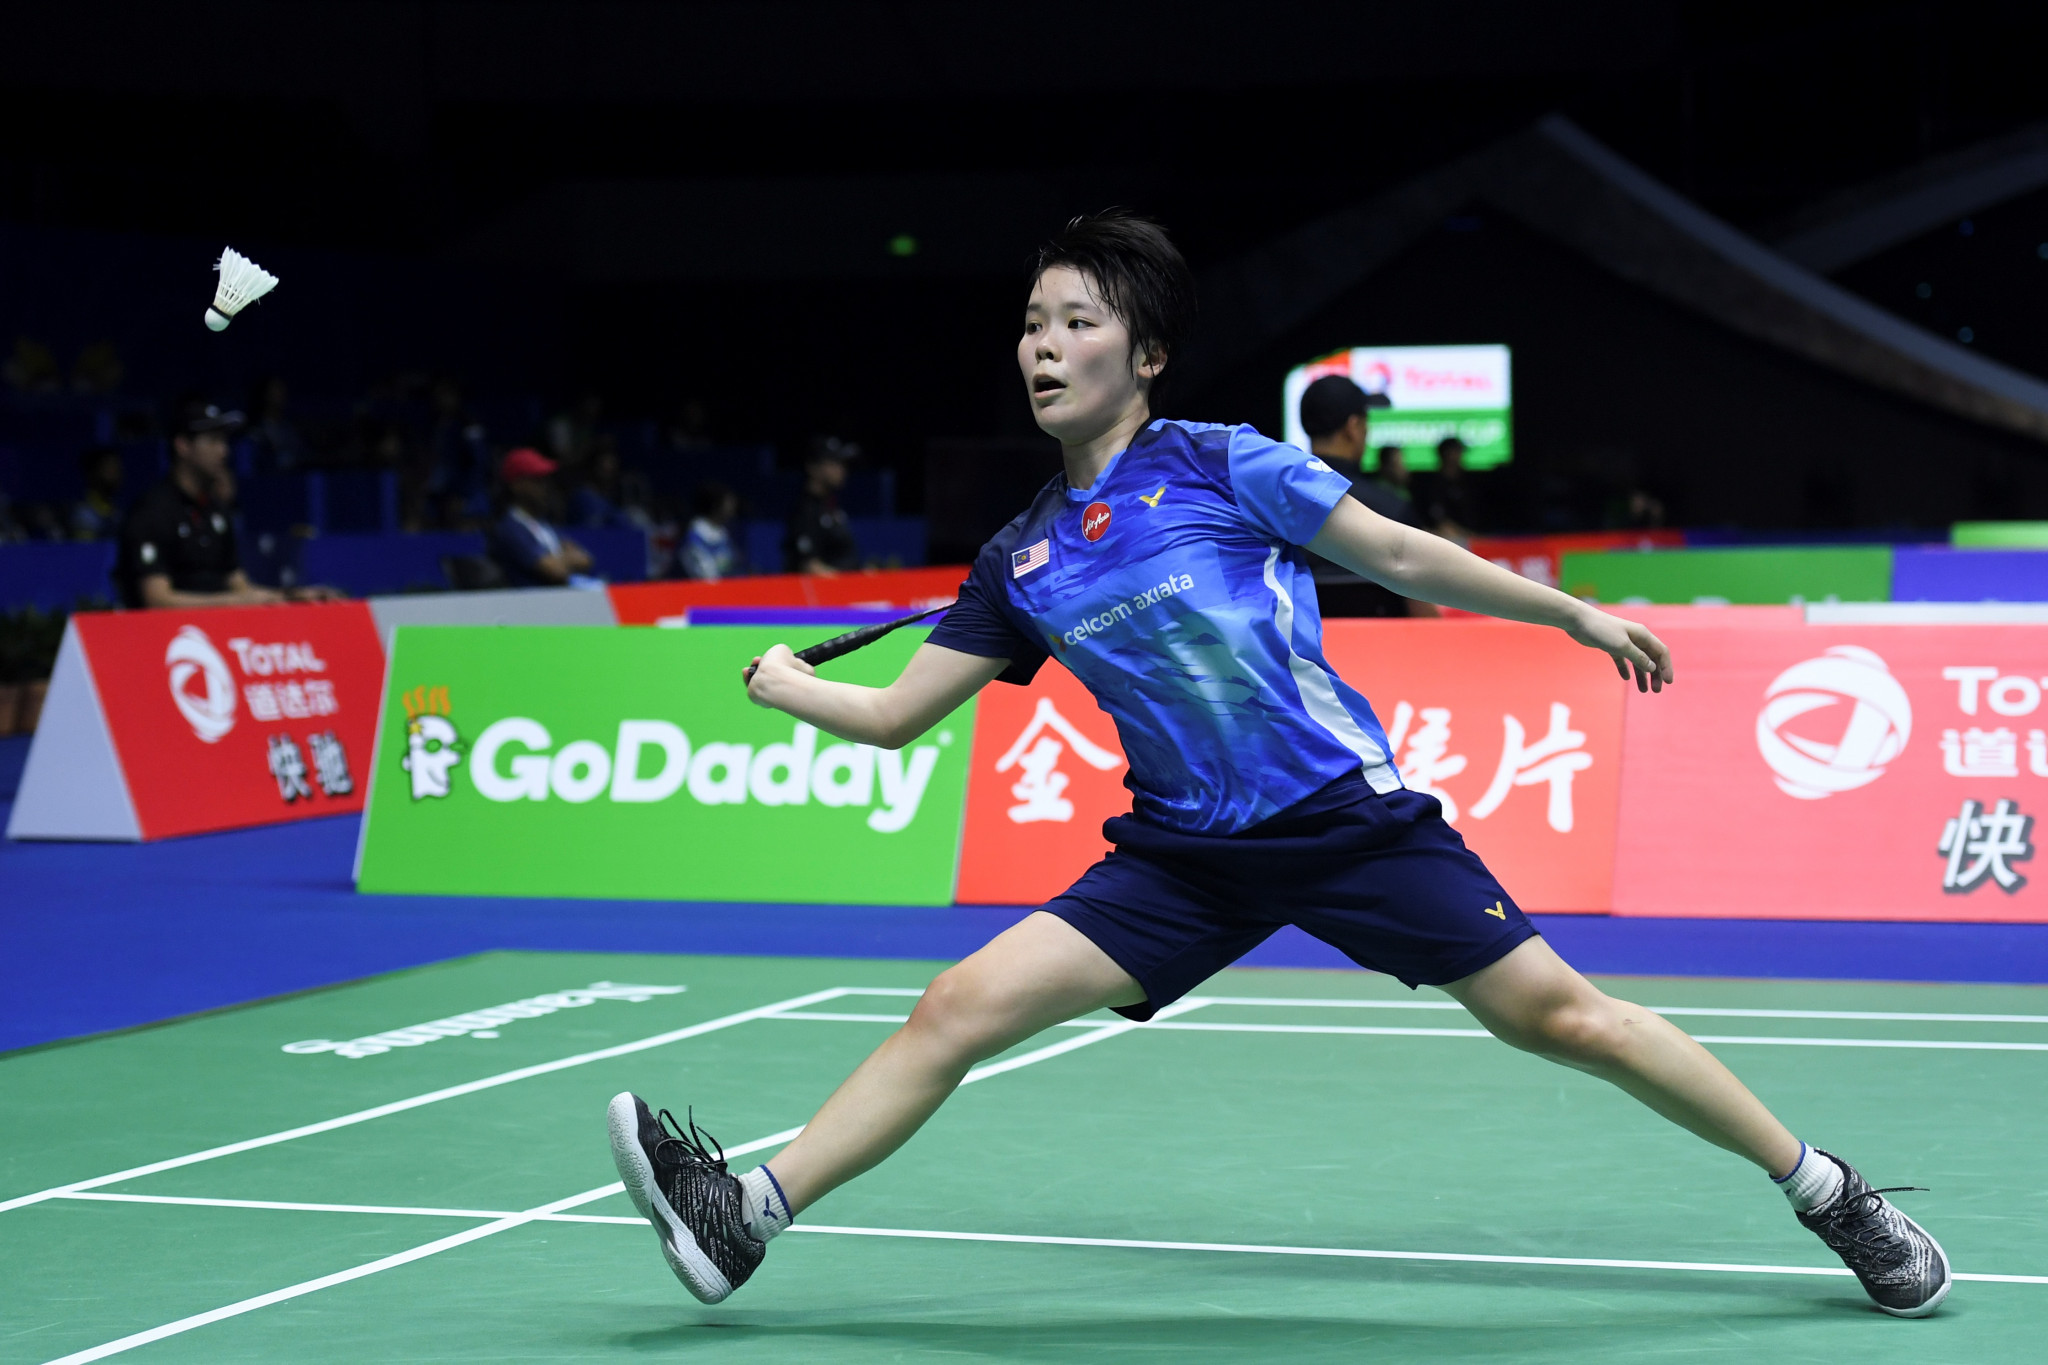 Goh earns first-round clash with top seed Yamaguchi at BWF Thailand Masters